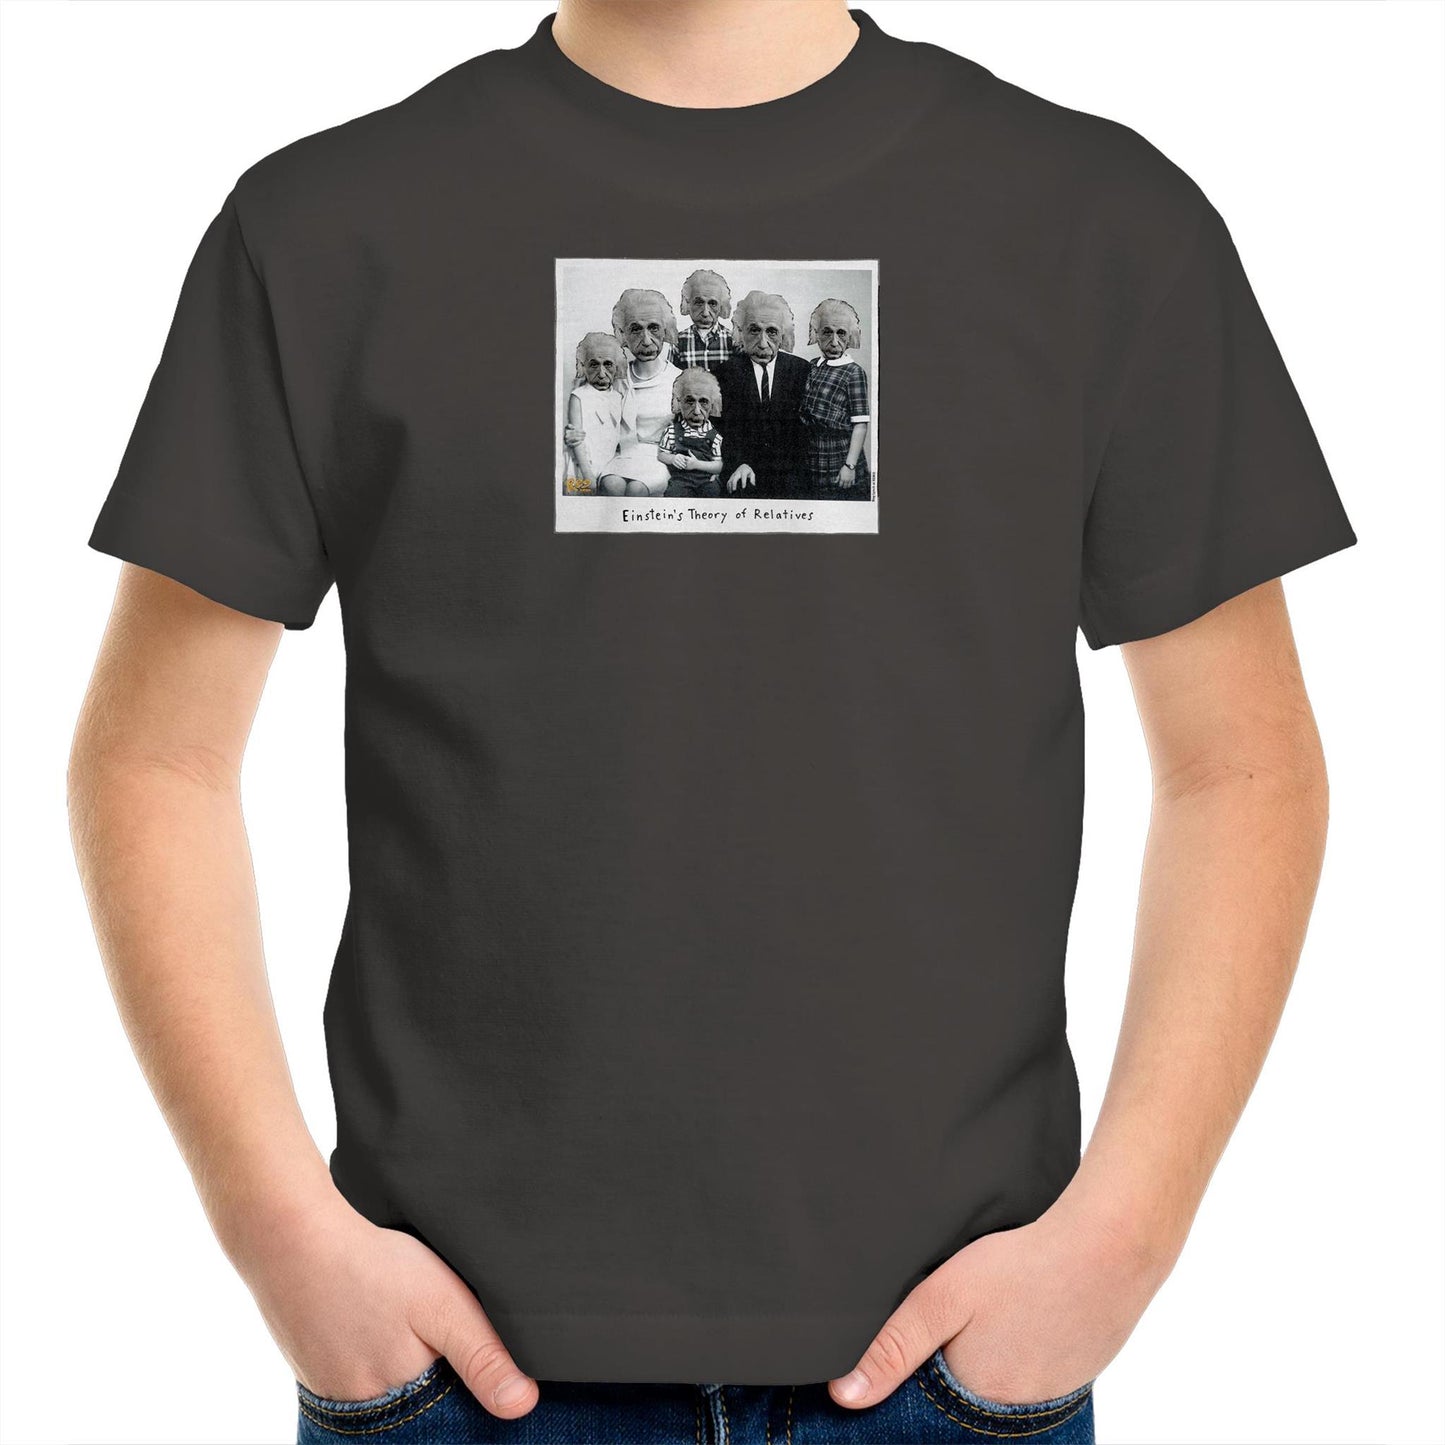 Einstein's Theory of Relatives T Shirts for Kids